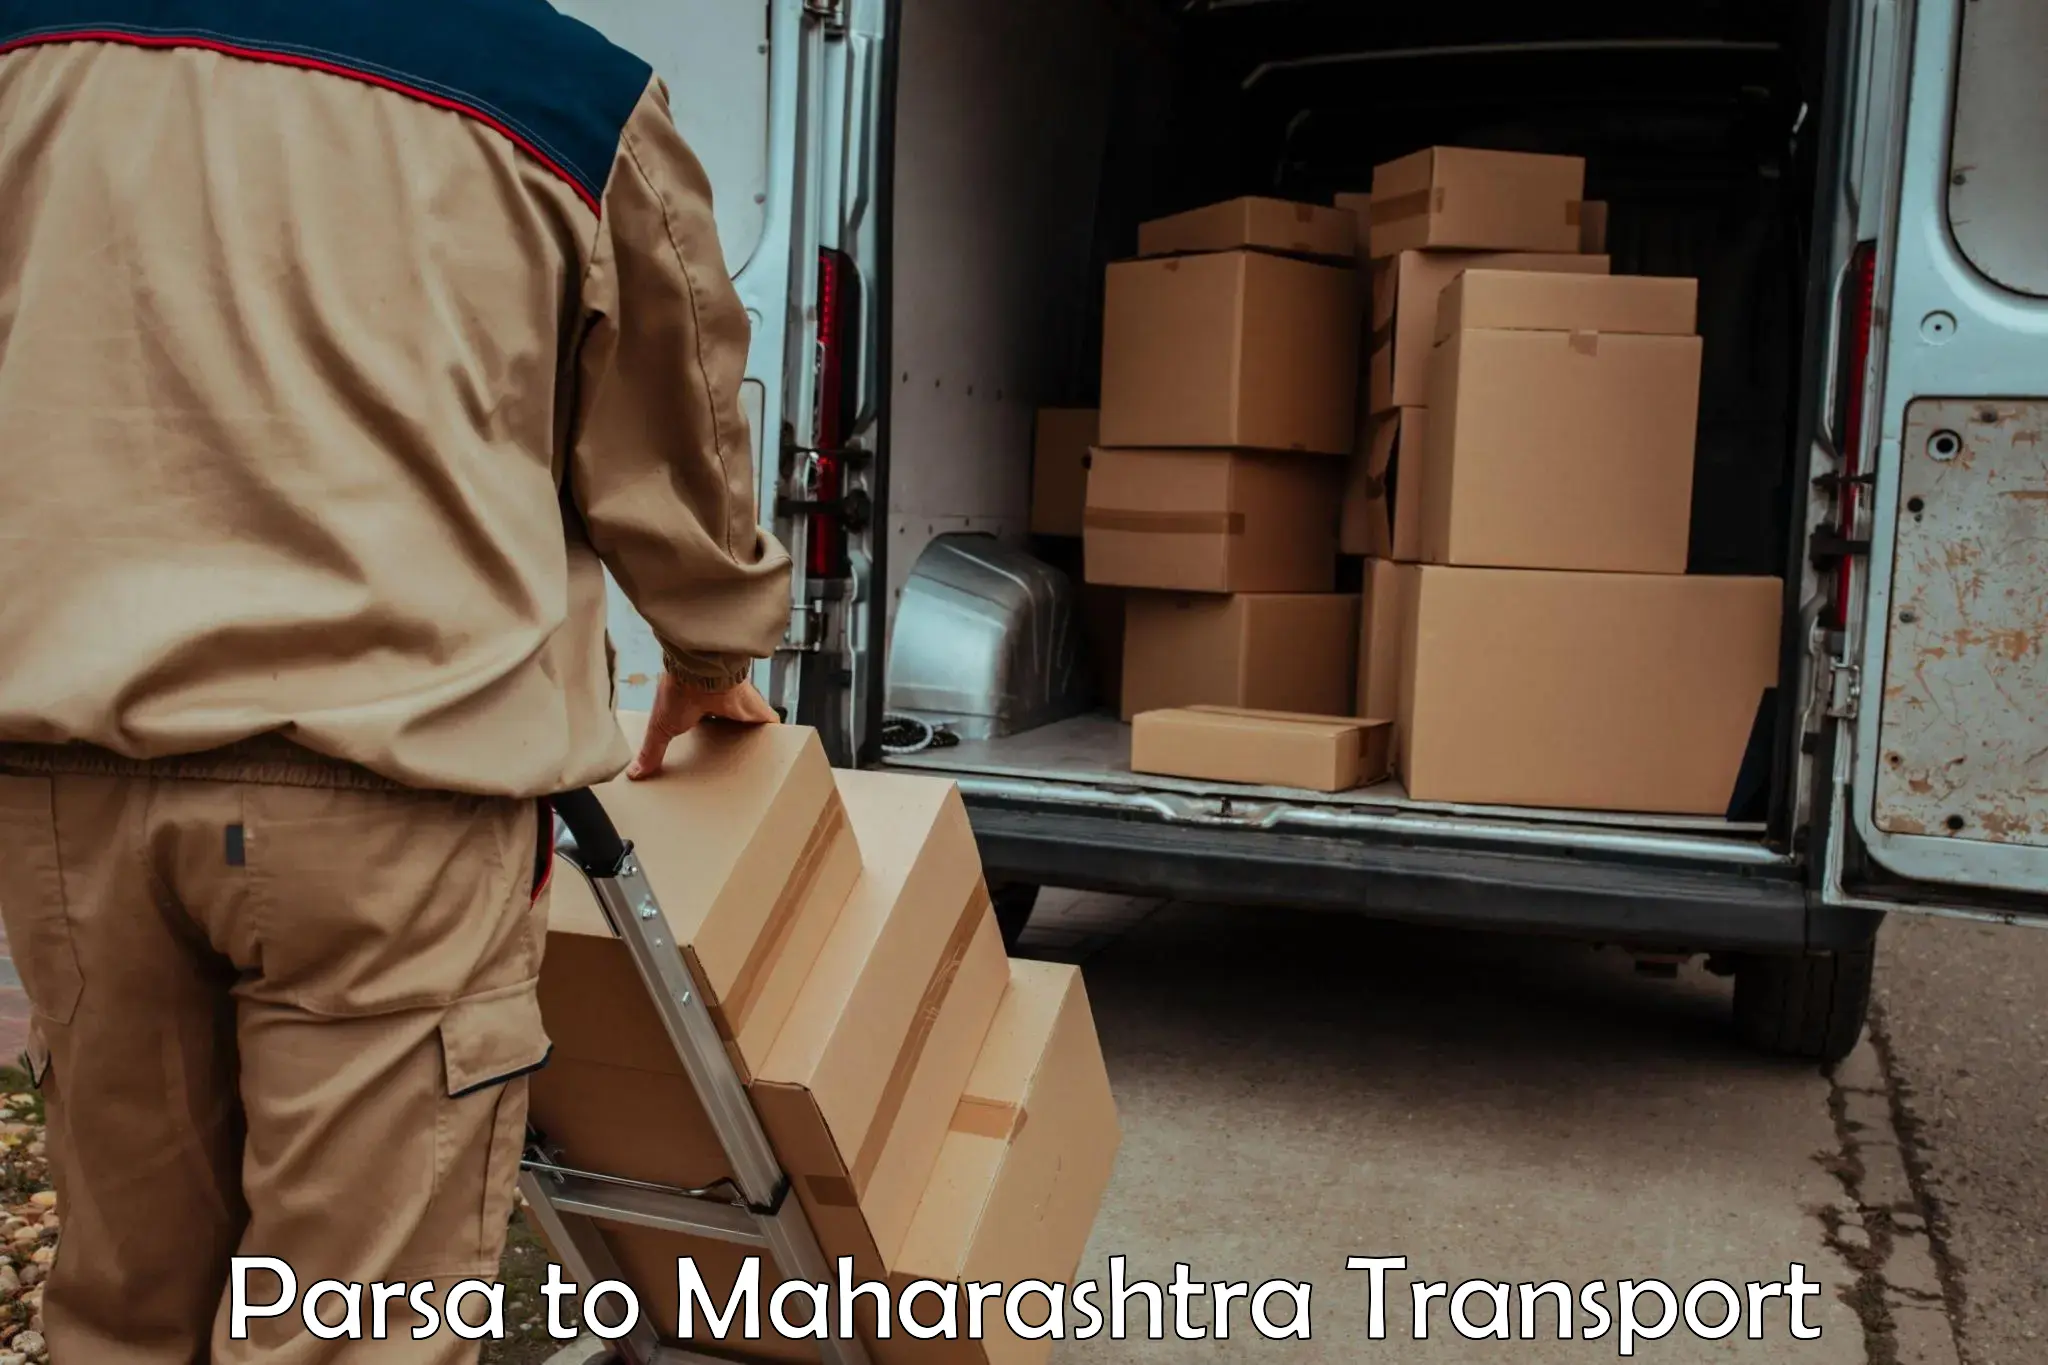 Express transport services Parsa to Vadgaon